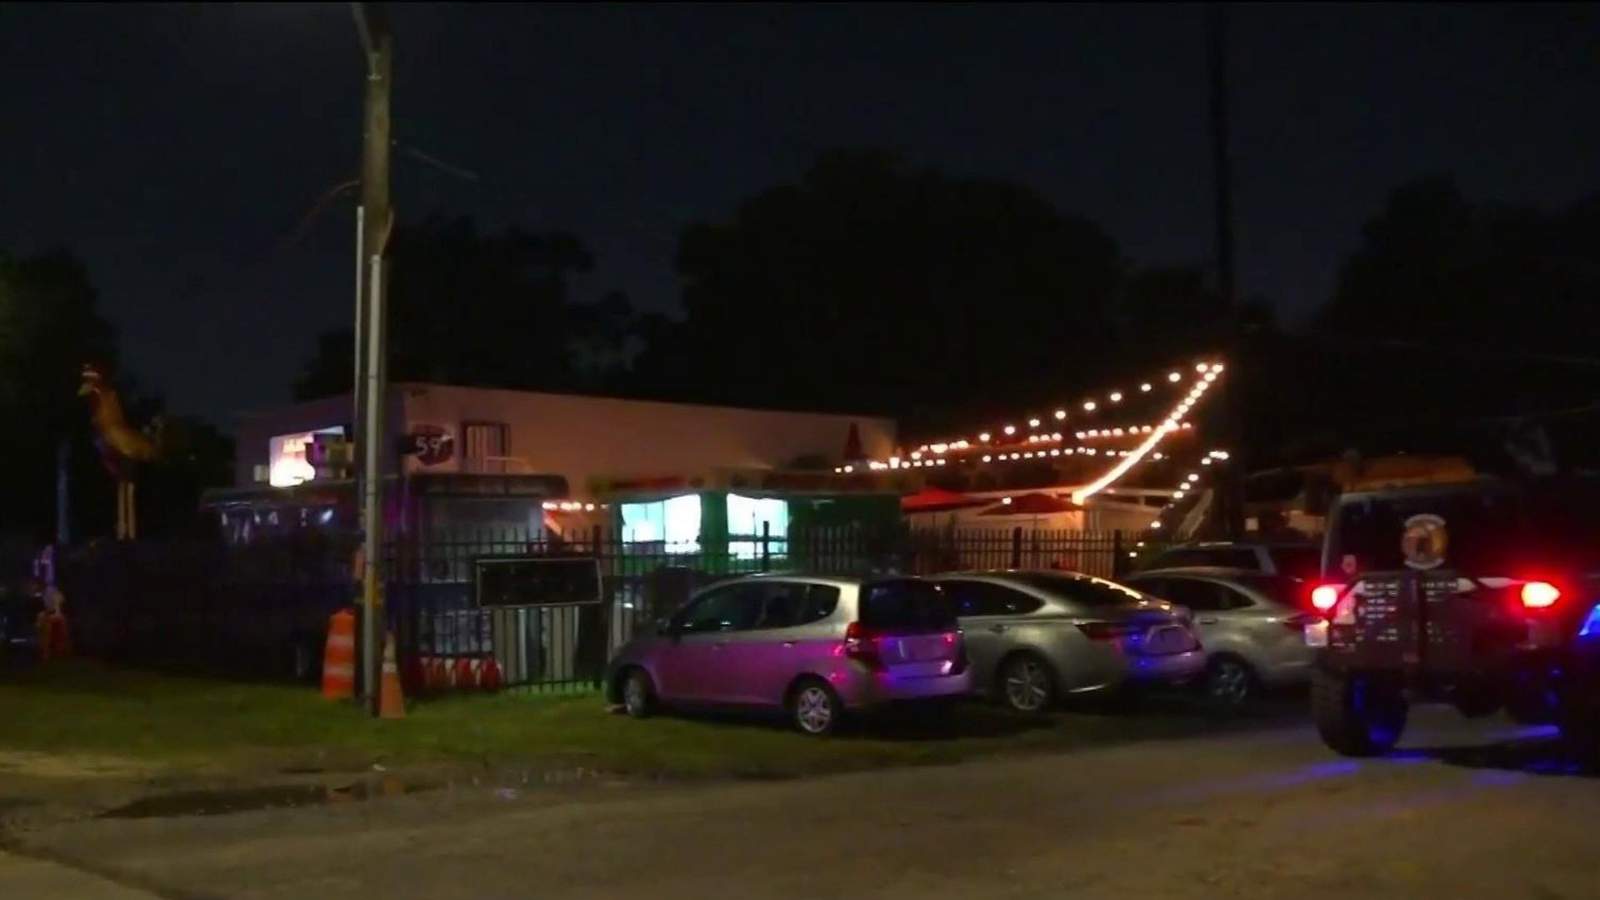 Houston bar shut down overnight for violating COVID-19 restrictions, authorities say